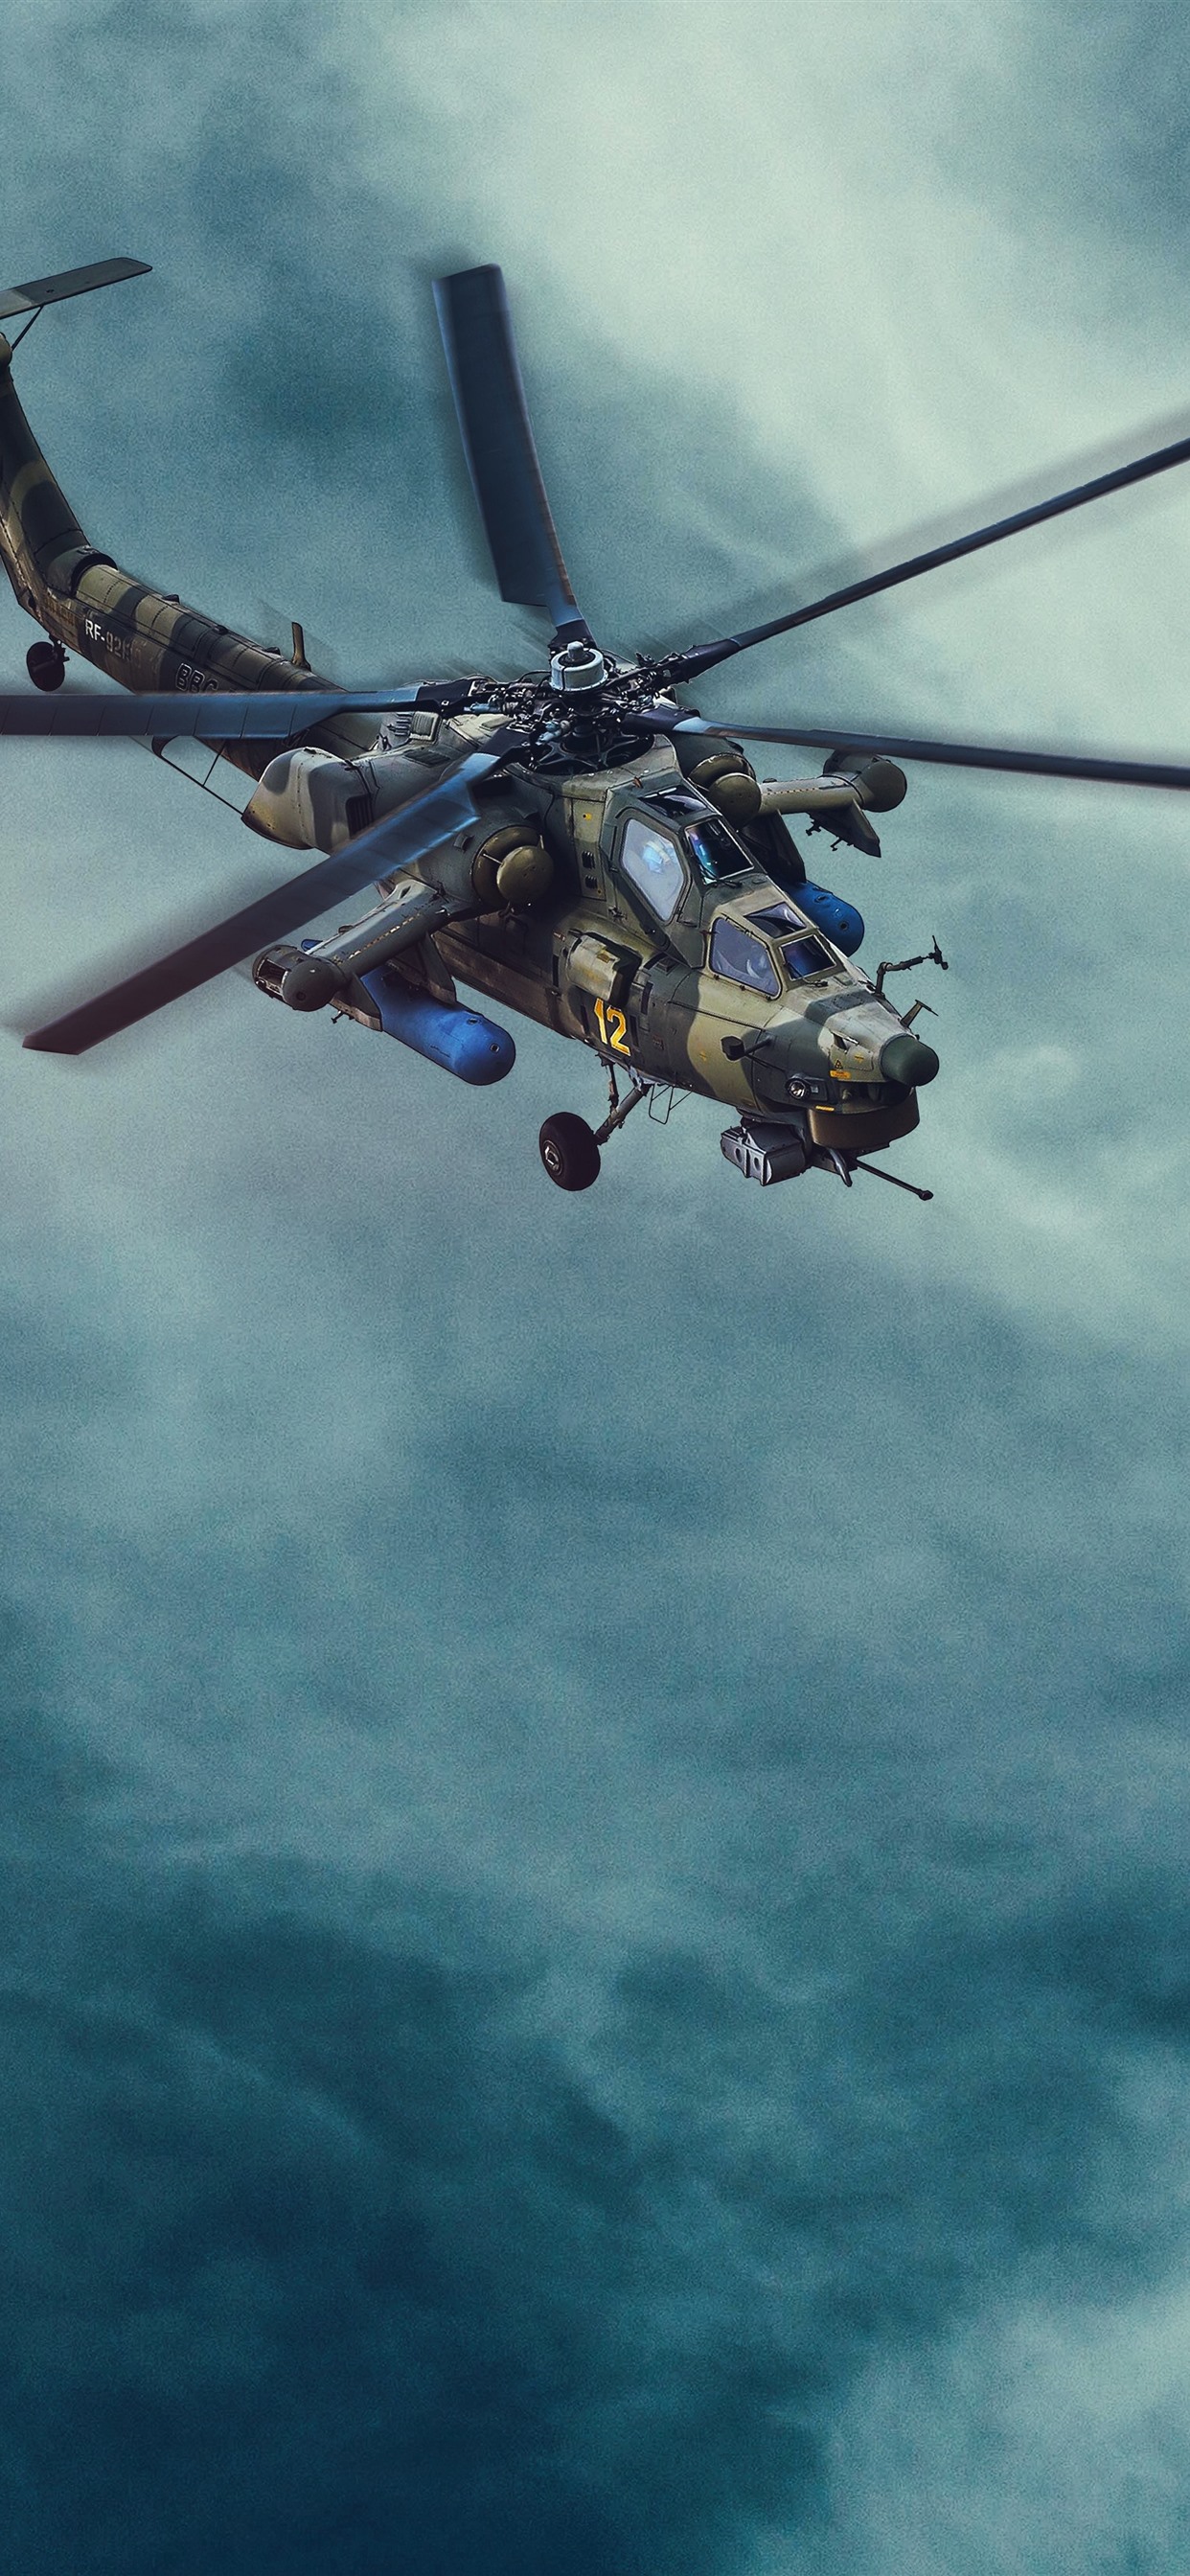 Helicopter Blue Sky iPhone Xs Max Wallpaper Background